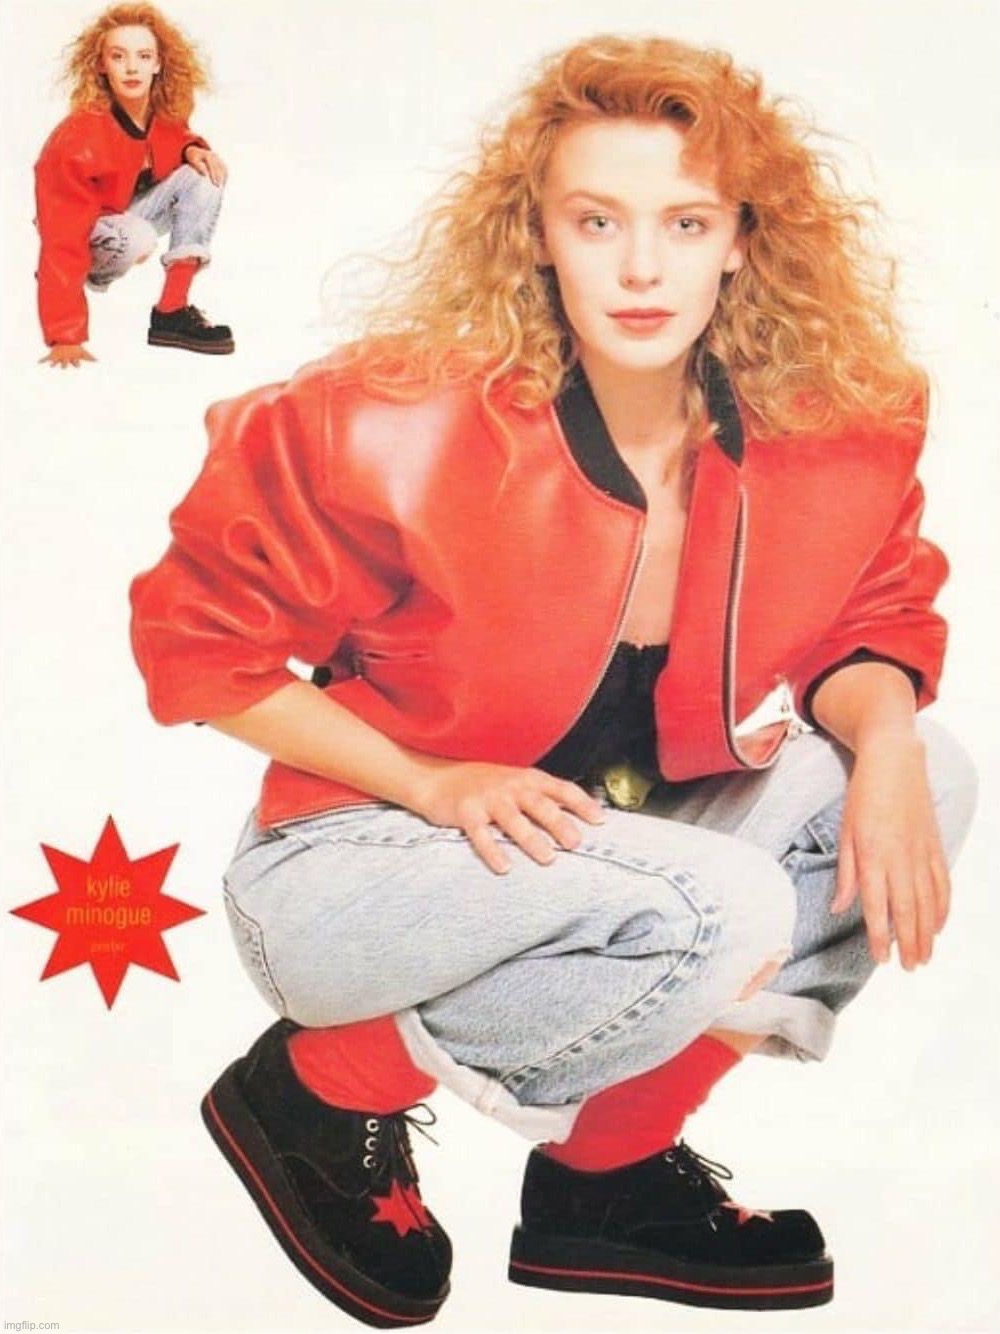 Kylie 80s poster | image tagged in kylie 80s poster | made w/ Imgflip meme maker